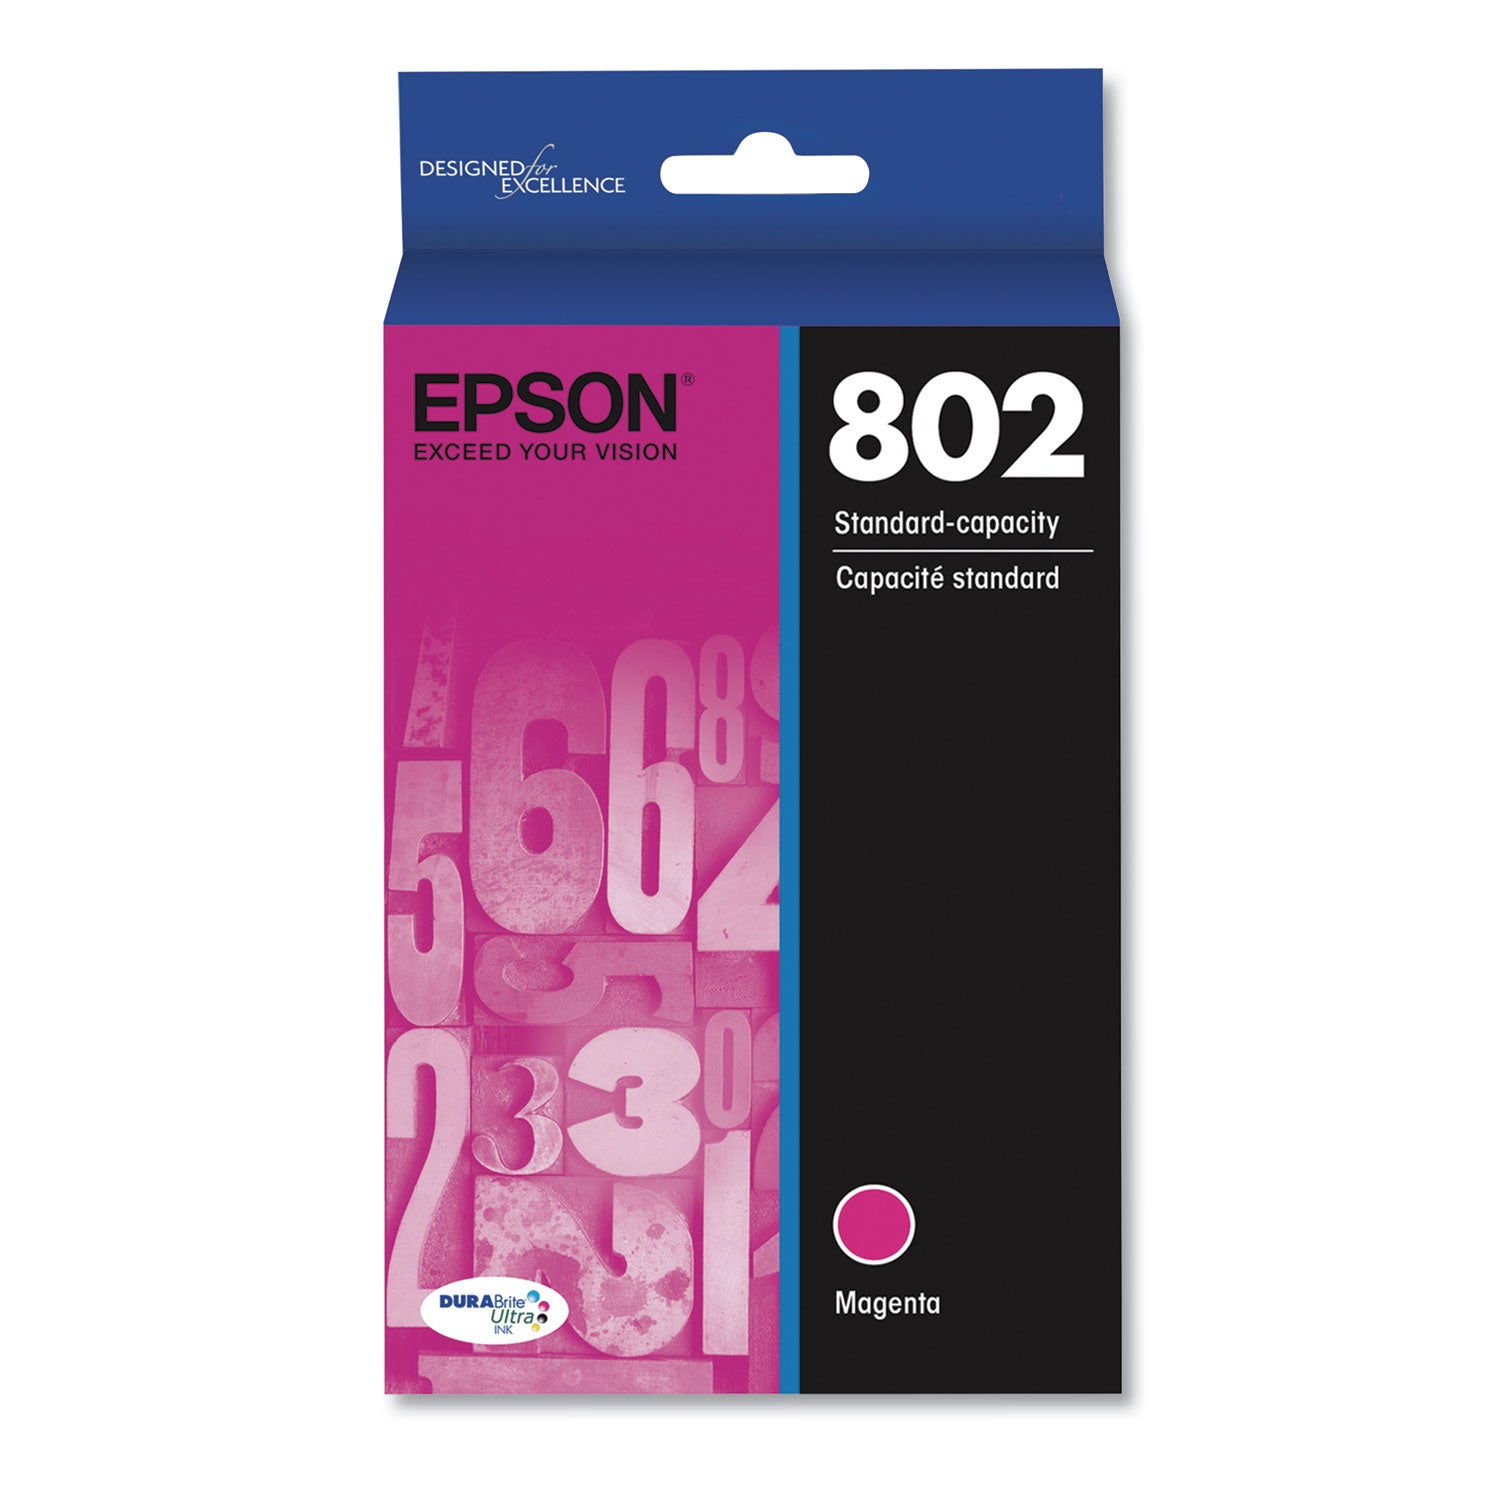 t802320-s-802-durabrite-ultra-ink-650-page-yield-magenta_epst802320s - 1